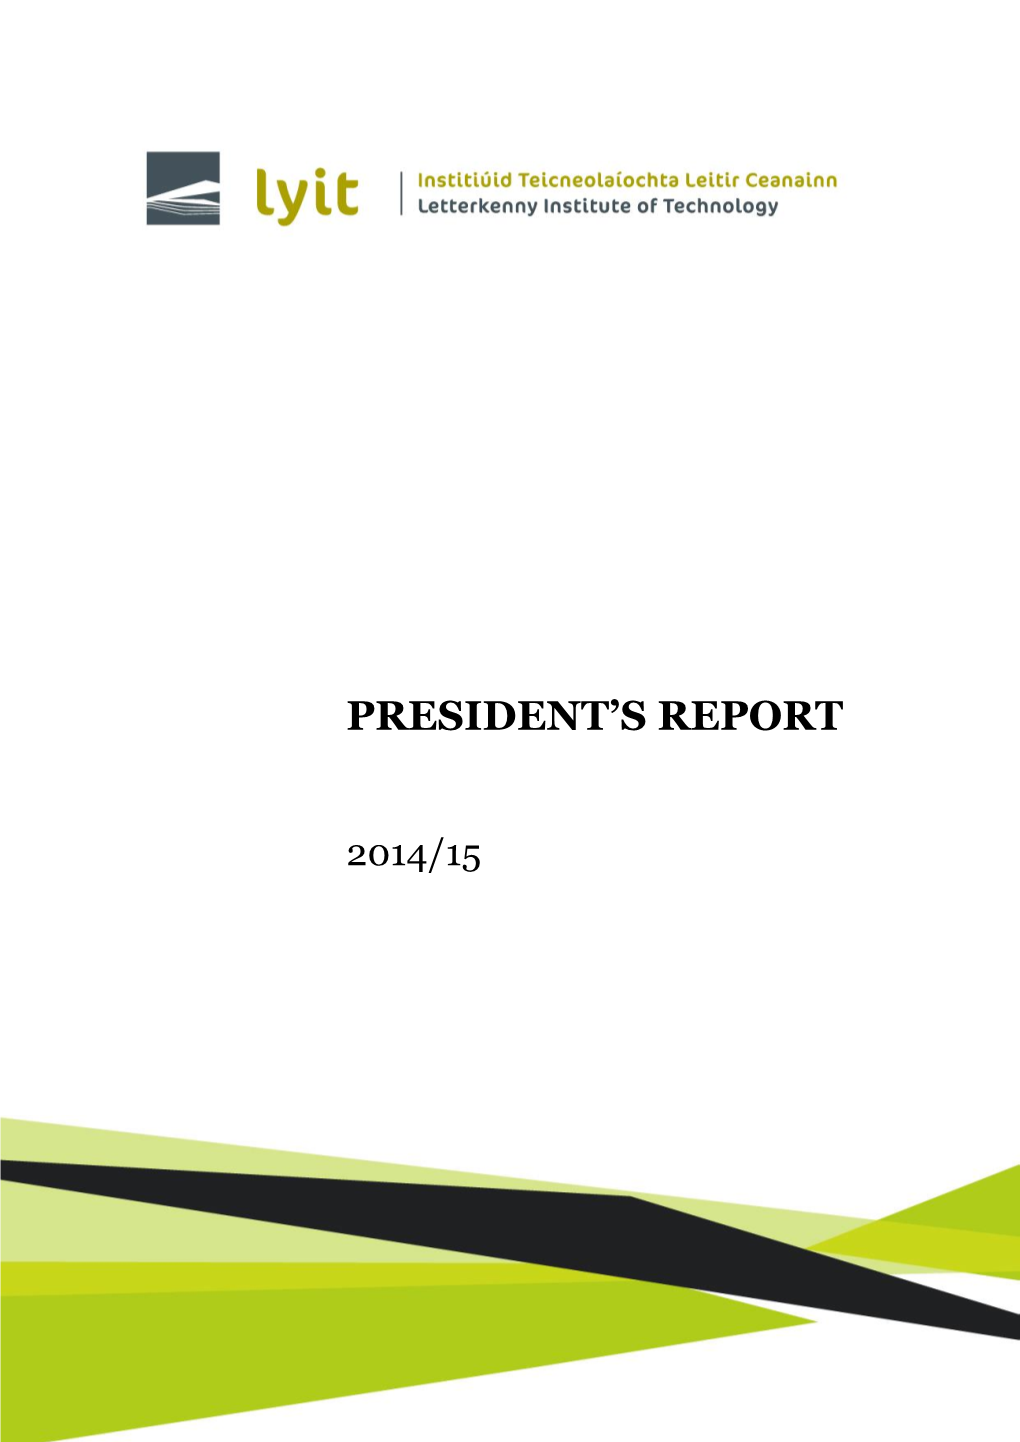 President's Annual Report 2014/15